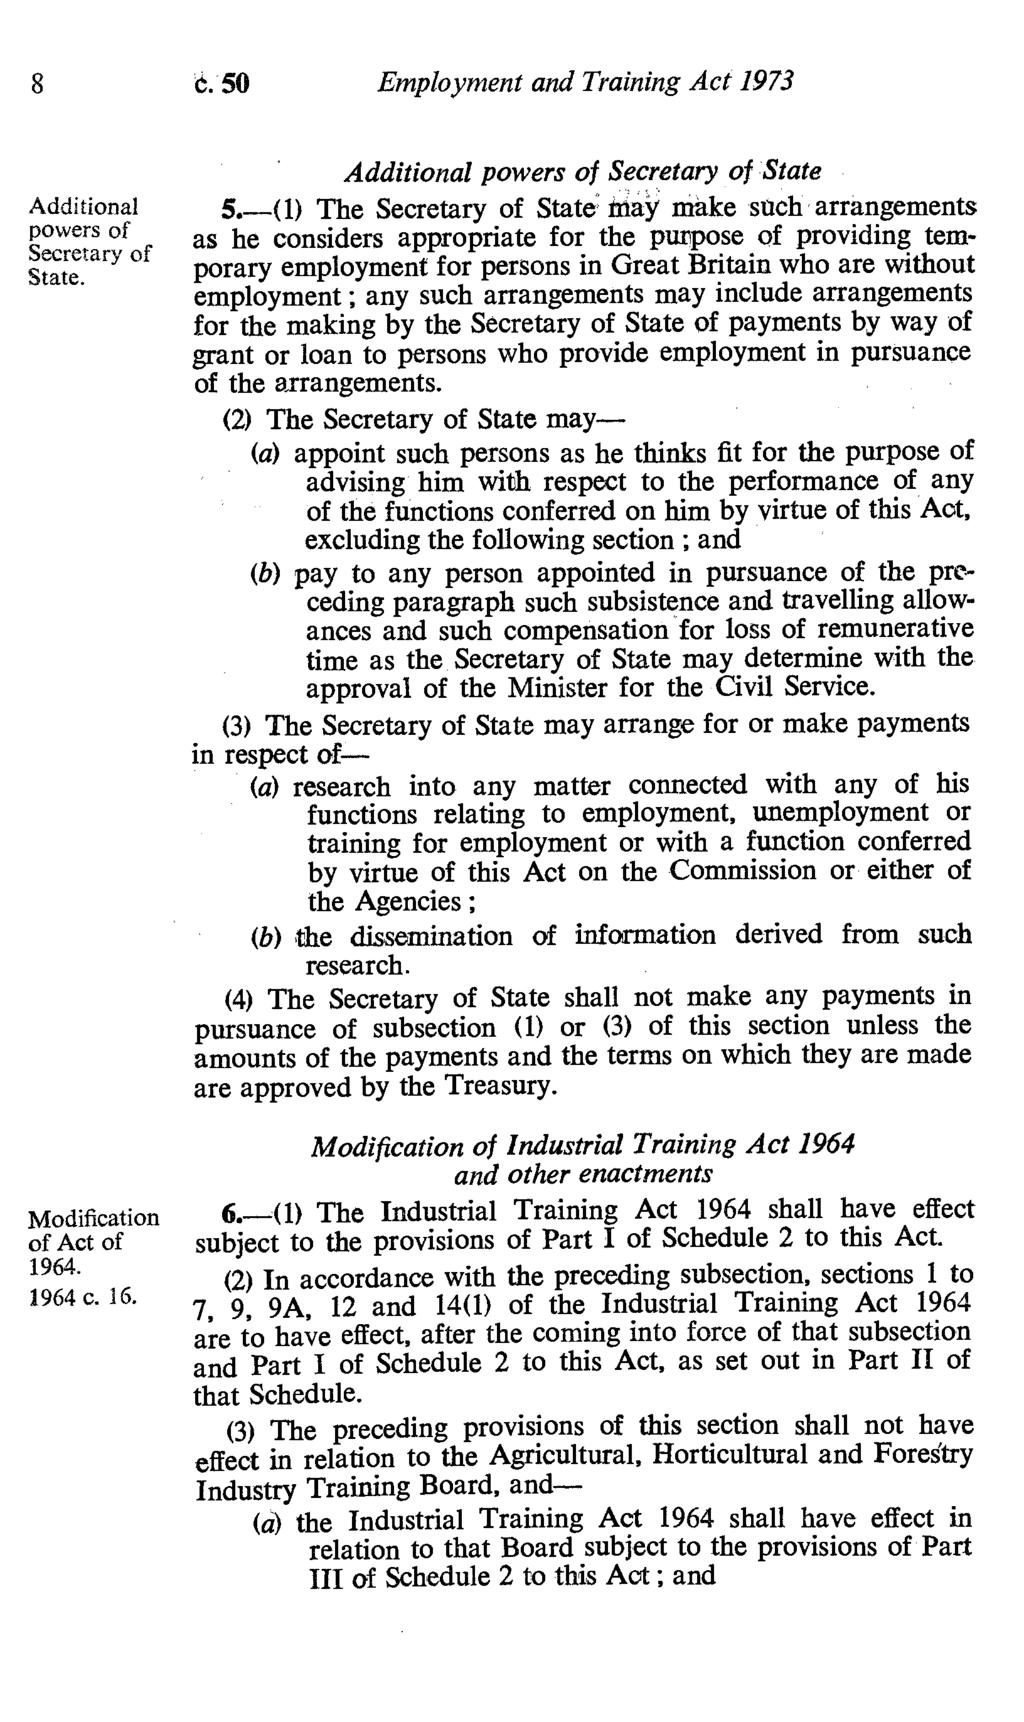 8 c.50 Employment and Training Act 1973 Additional powers of Secretary of State. Modification of Act of 1964. 1964 c. 16. Additional powers of Secretary of State 5.